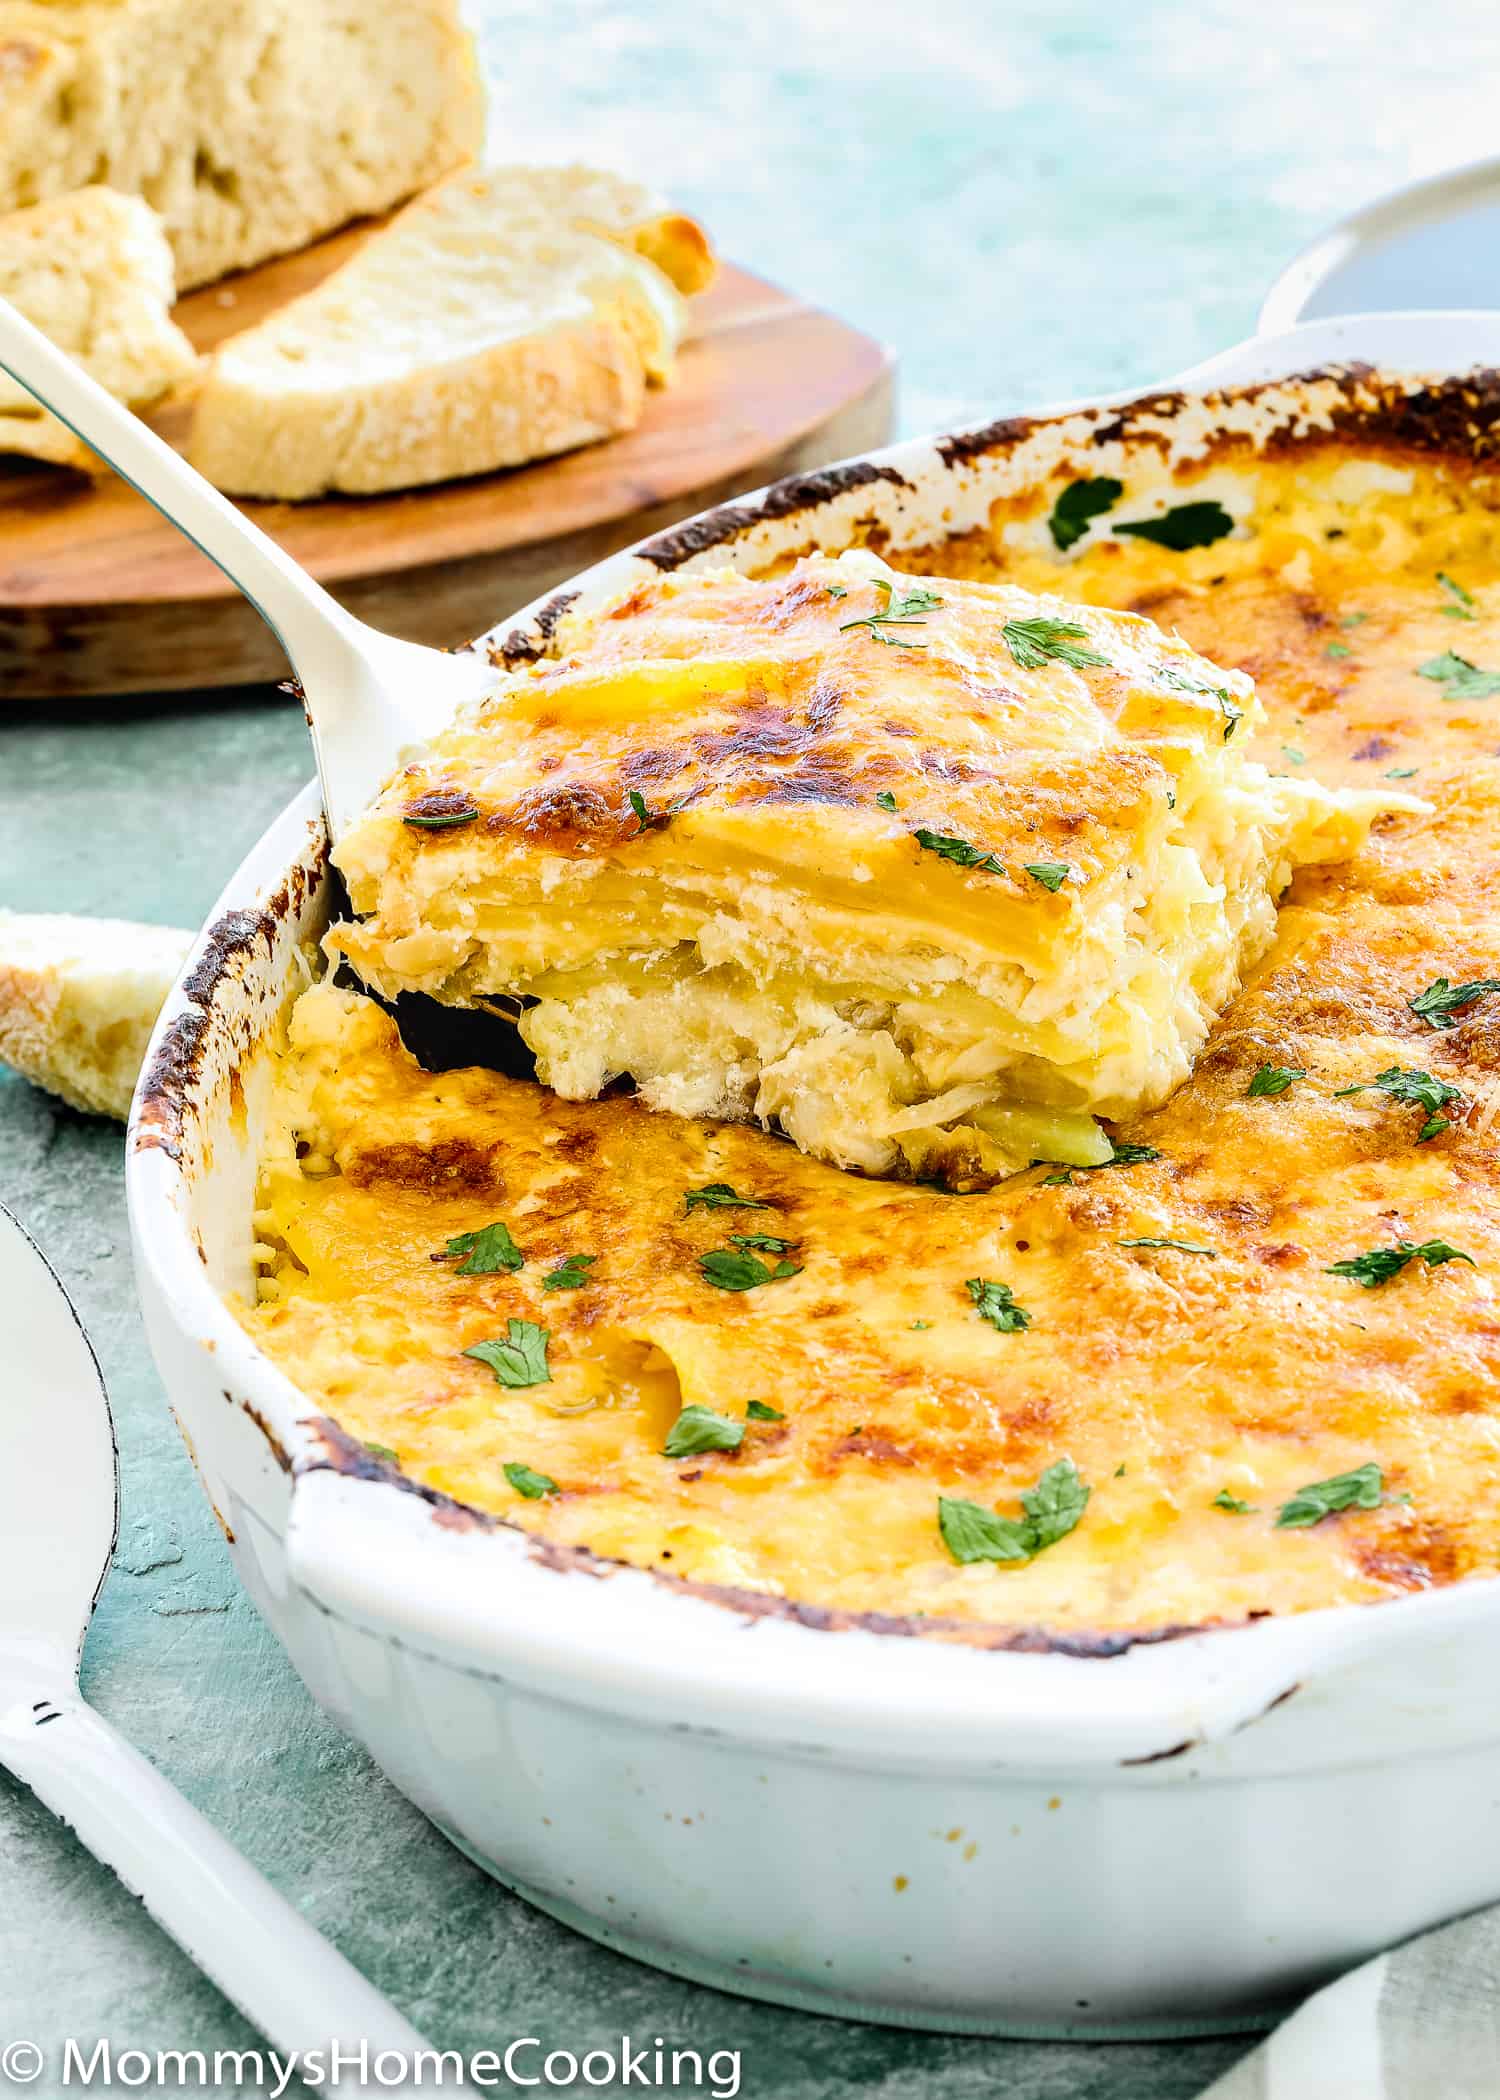 This Cheesy Potatoes and Cod Casserole recipe is cheesy, creamy, and easy to make! Loaded Potato, cheese and cod, this dish is a whole dinner in one! For sure a go-to dinner for any day of the week. https://mommyshomecooking.com